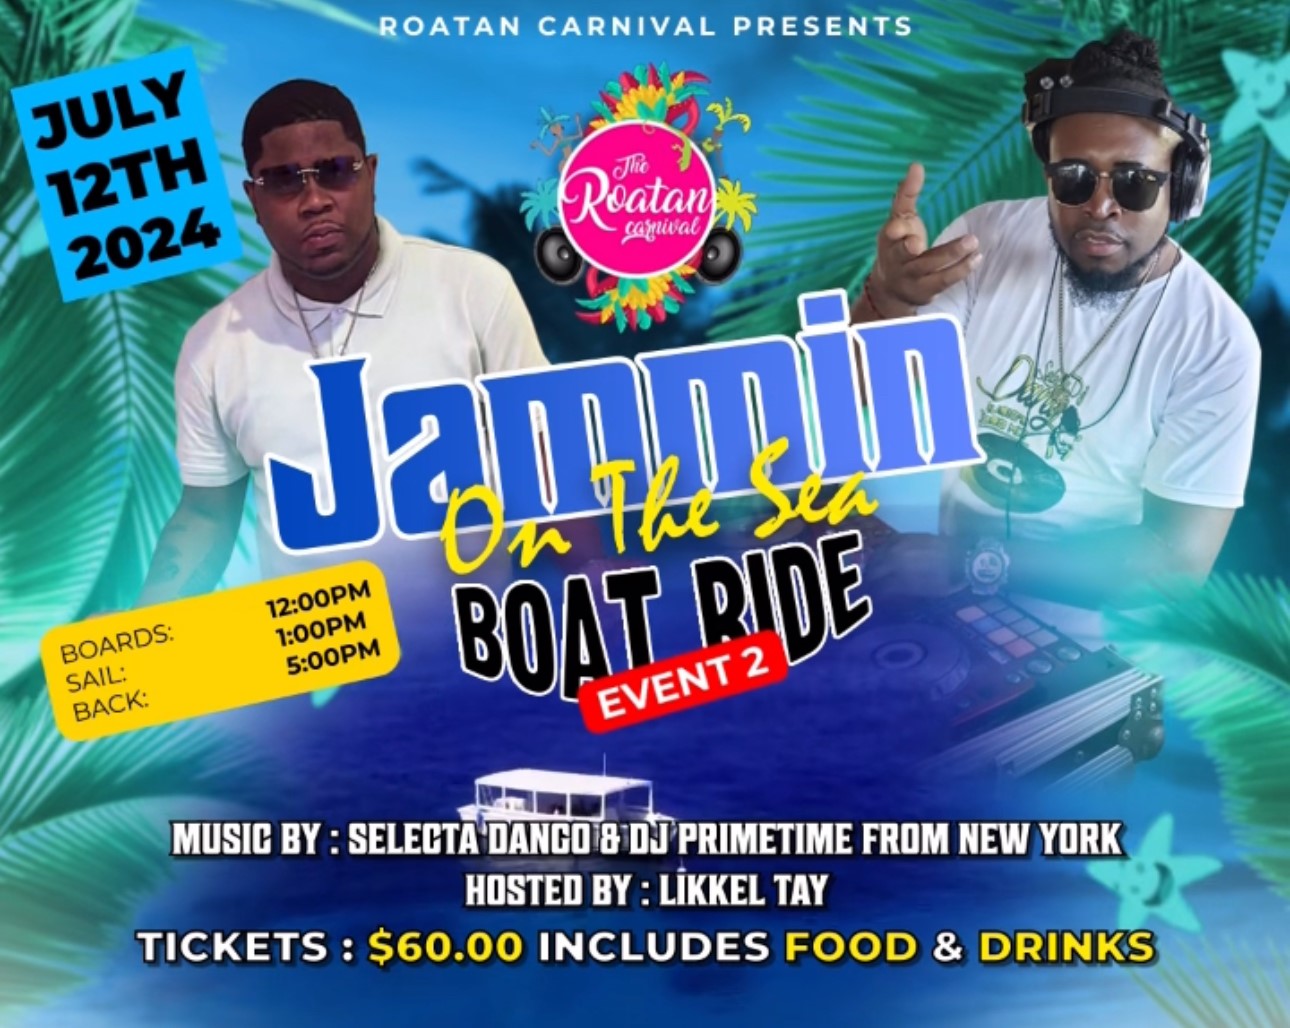 Roatan Carnival 2024 Jammin On The Sea Boat Ride on Jul 12, 12:00@Roatan Island West Bay Beach - Buy tickets and Get information on www.fetefinders.com tickets.fetefinders.com